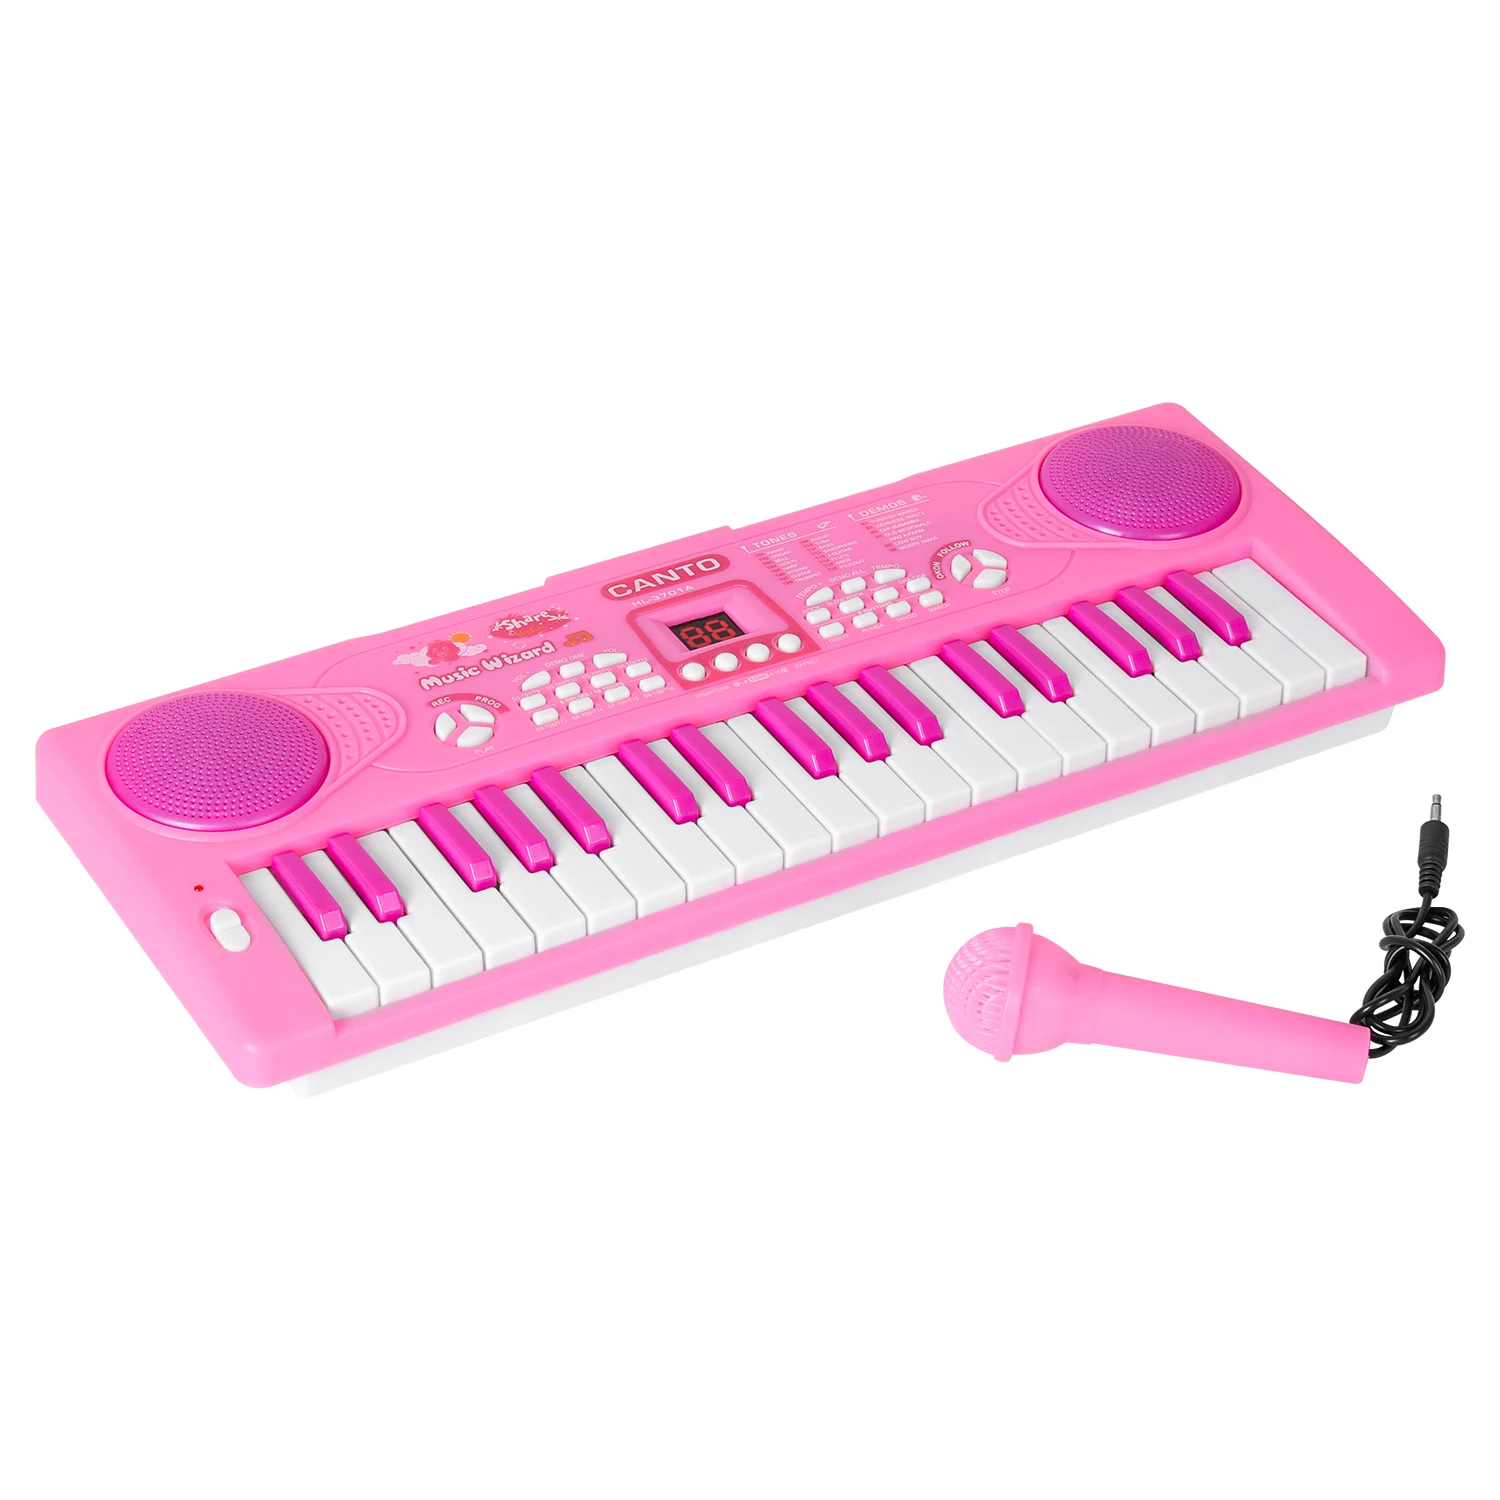 blue zhuolong Electric Piano 37 Keyboard Instrument with Microphone Kids Educational Toy